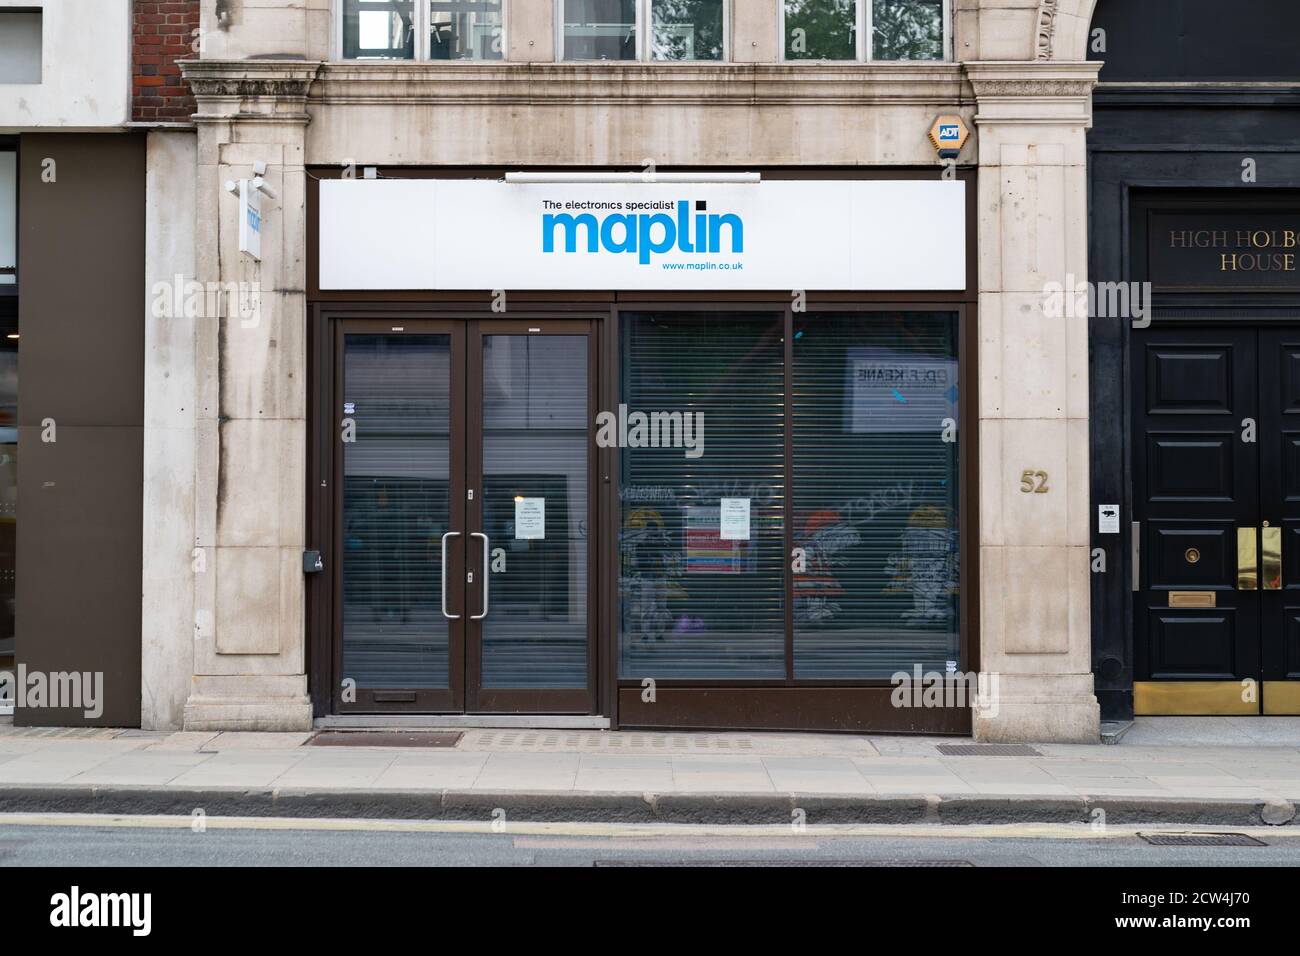 LONDON, ENGLAND - JULY 24, 2020: Maplin electronic store branch at Holborn, London closed during the COVID-19 pandemic and following its financial col Stock Photo